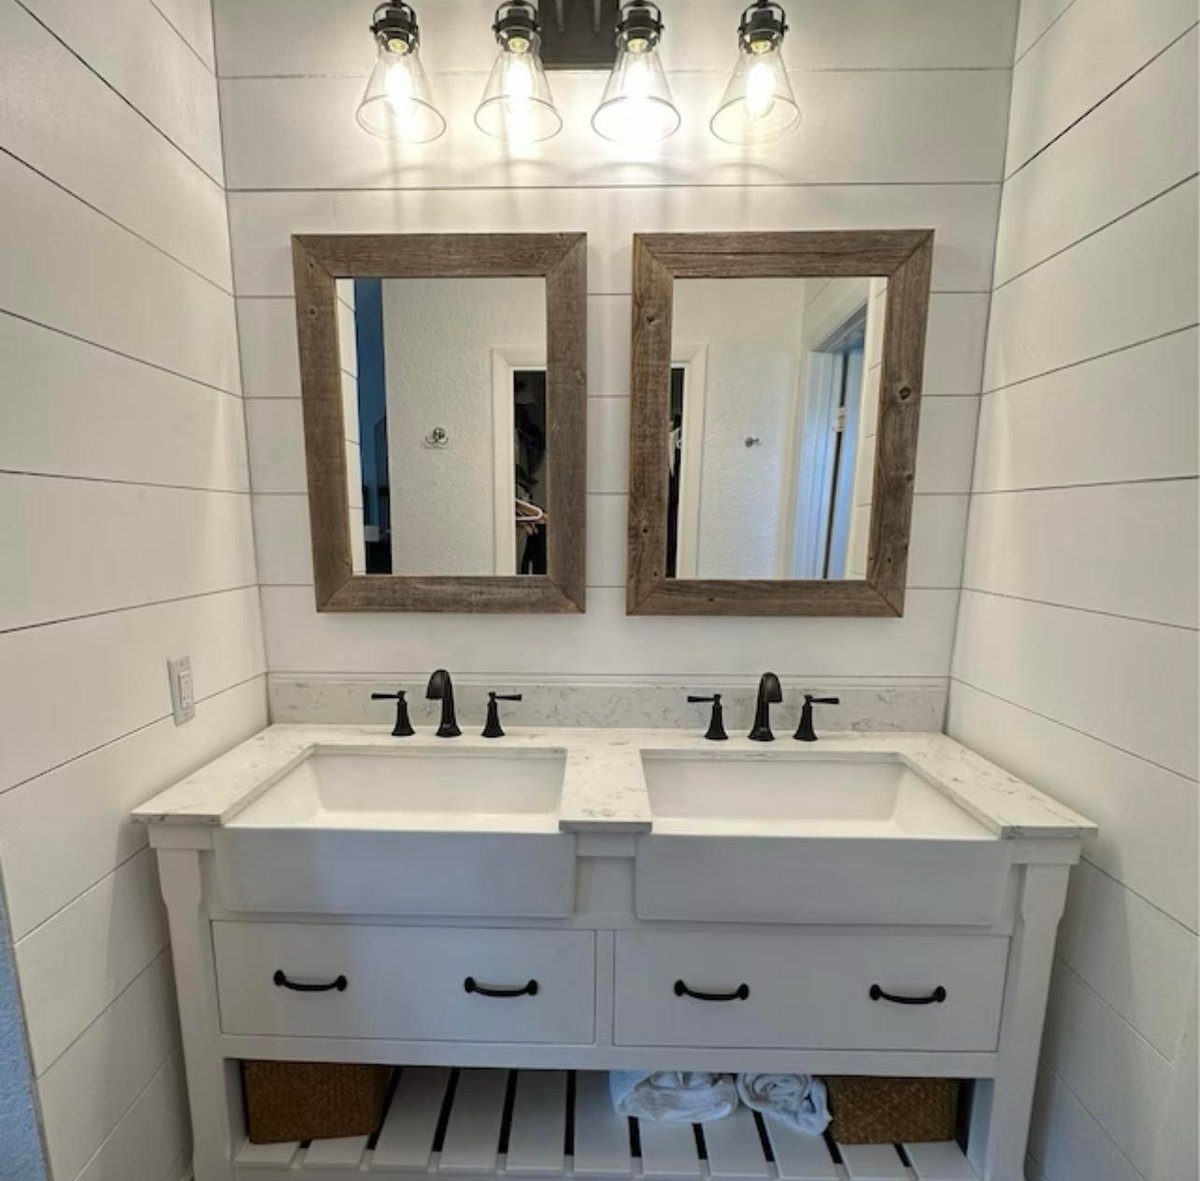 Transform your bathroom into a summer retreat with this amazing Barnwood Vanity Mirror! 🔆🏊‍♀️🛁 The natural wood texture and rustic look will create a warm and welcoming atmosphere! 😍🙌 Shop now on Etsy and add some charm to your space! bit.ly/462XCi7 #vanitymirror